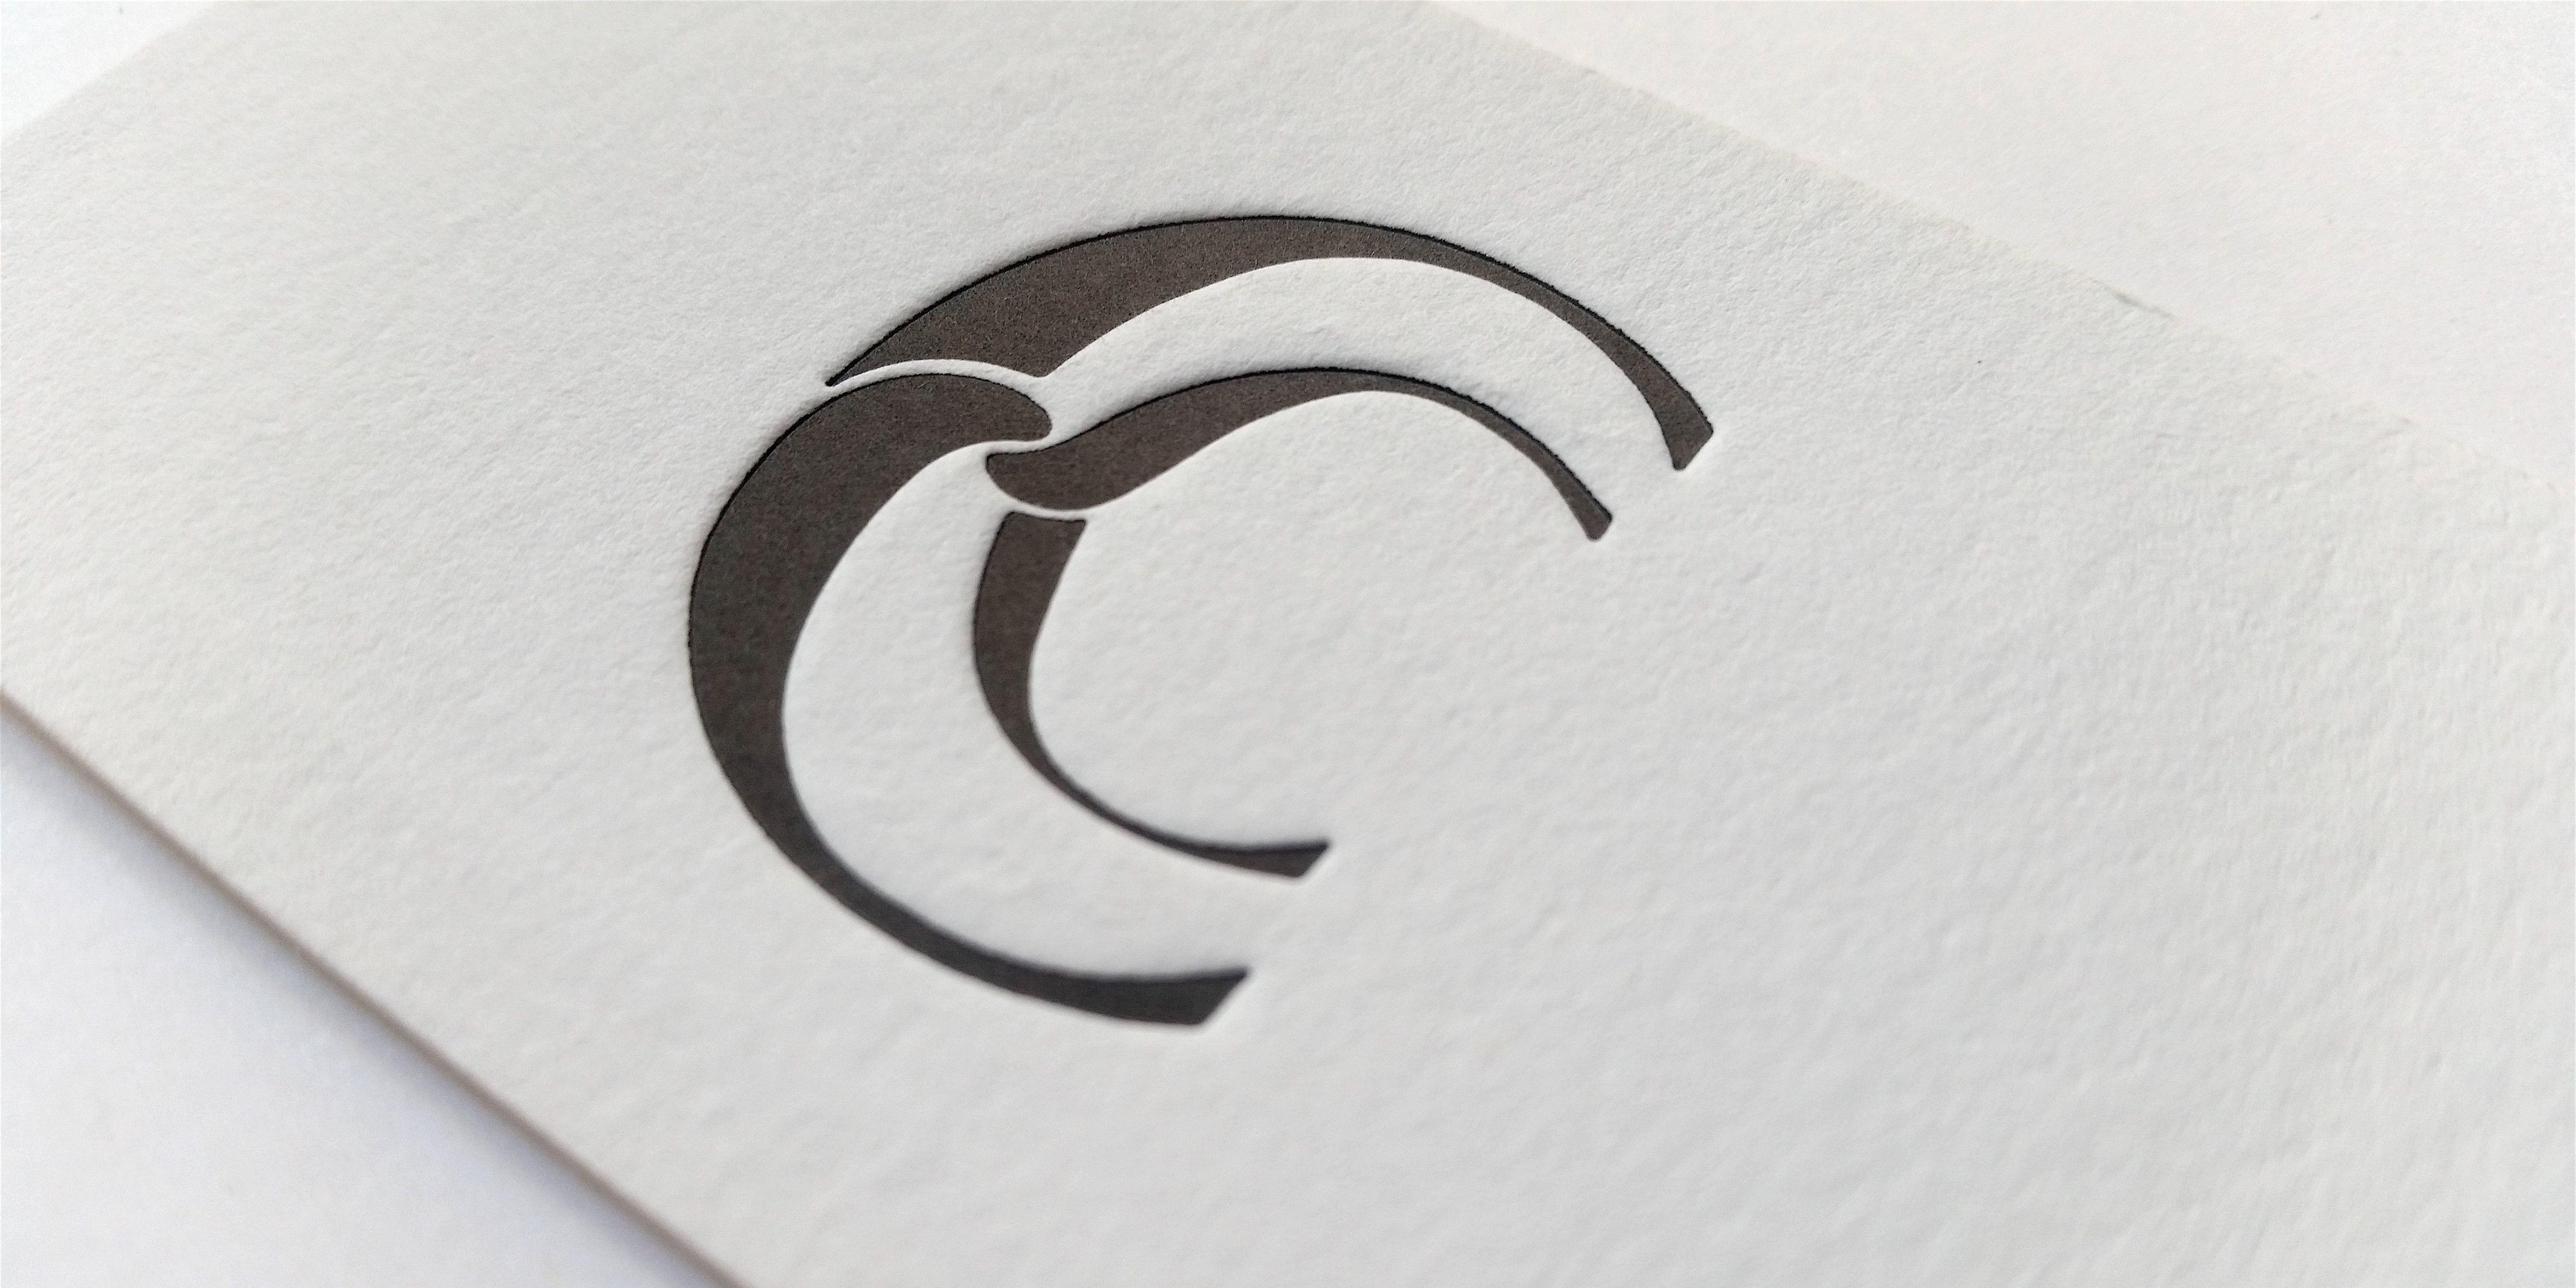 Impression Printing Logo - Letterpress Printers NYC: Business Cards & Specialty Printing